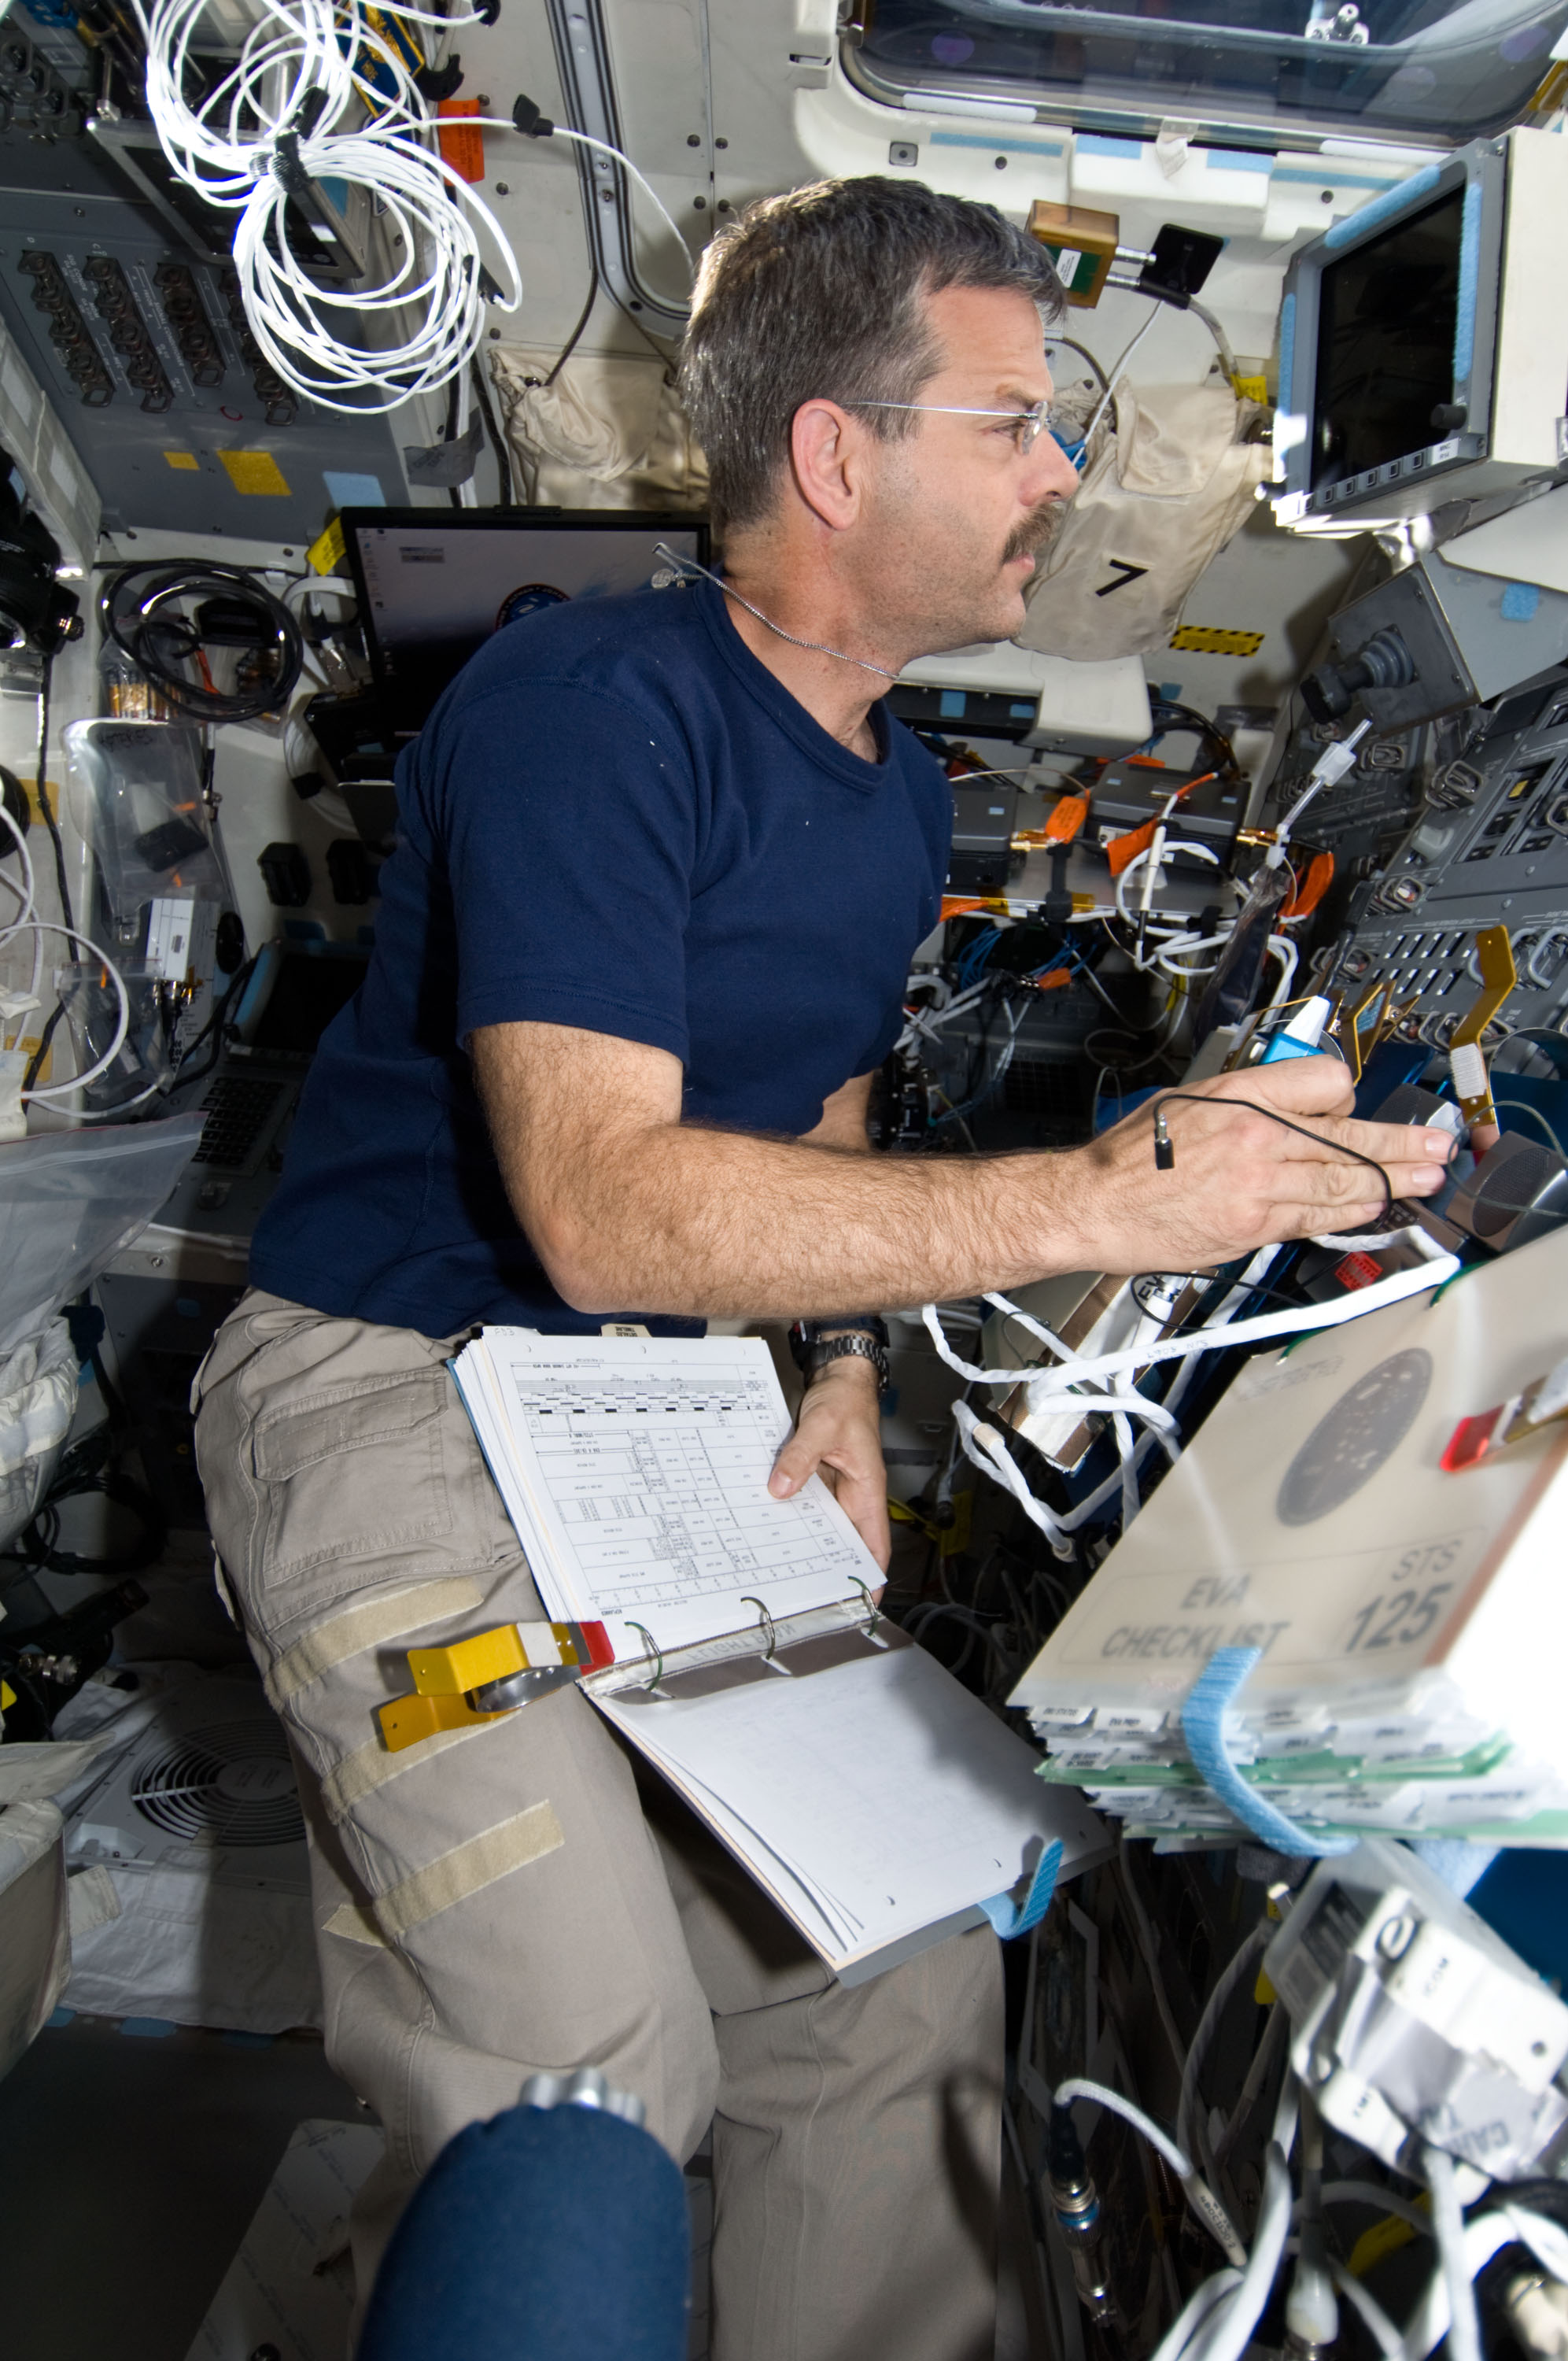 The commander of the mission on the flight deck communicates with the astronauts who are spacewalking.